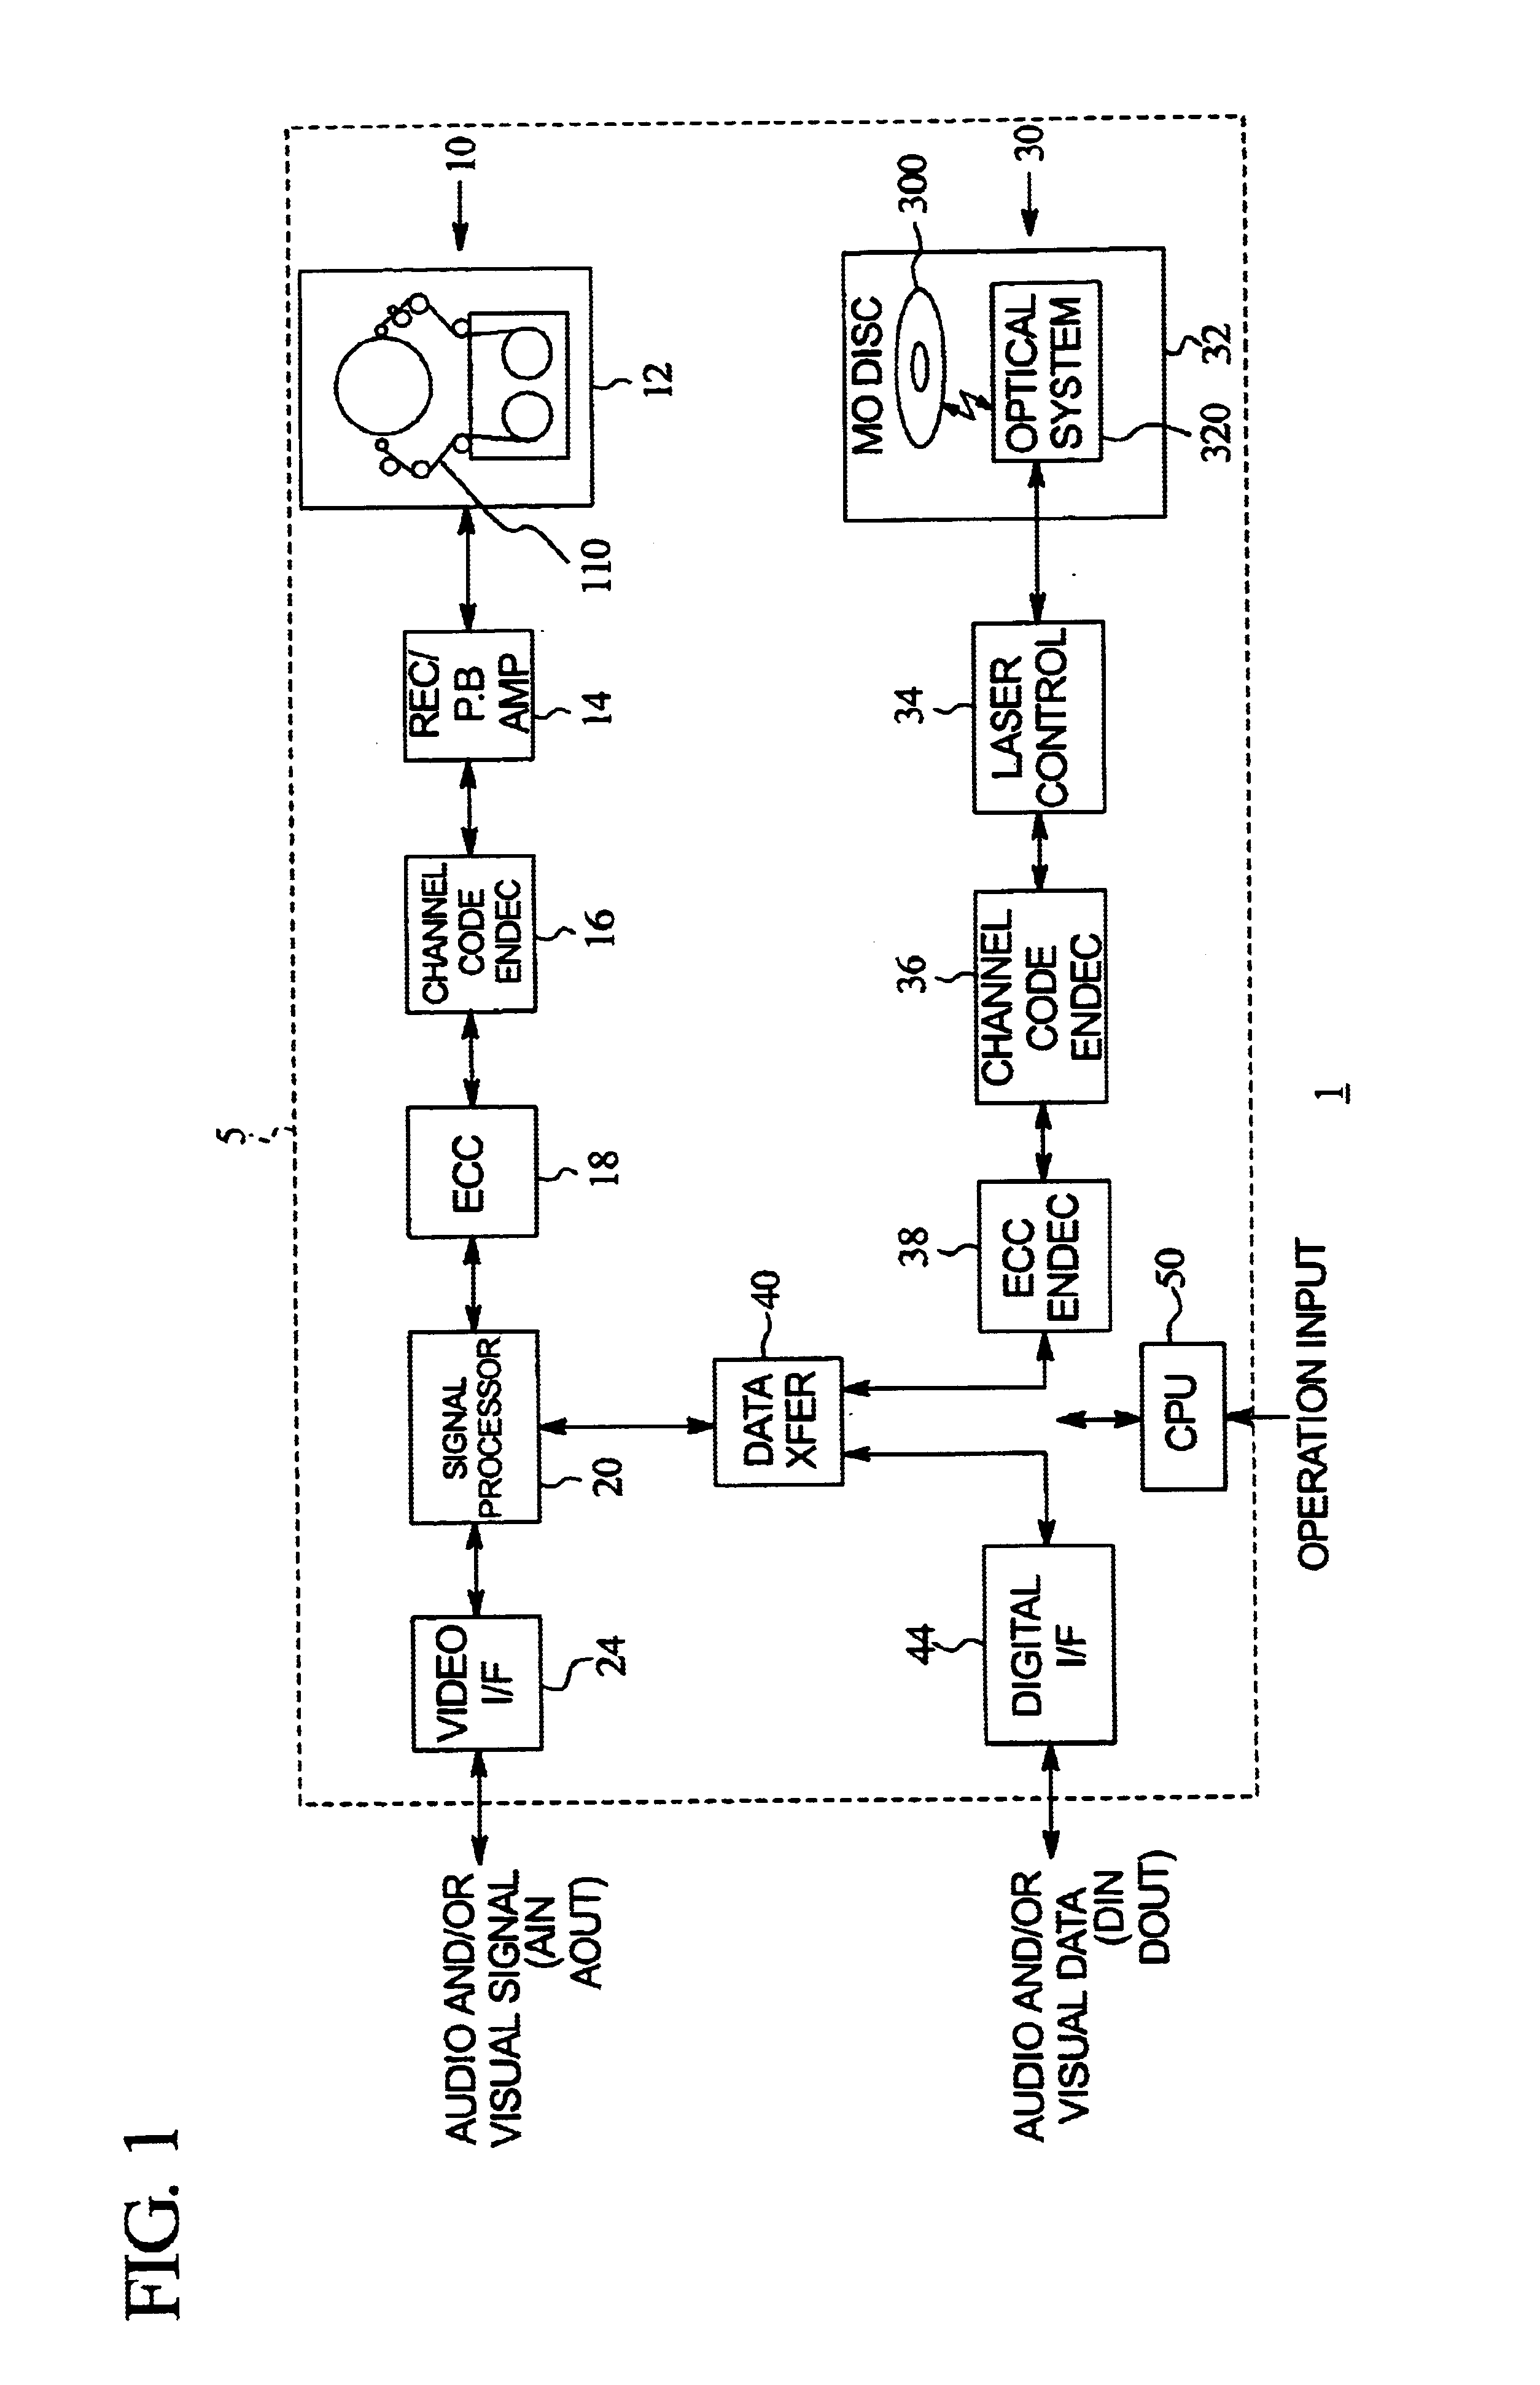 Data recording and reproducing apparatus having a data transferring device for selectively transferring data between multiple data recording and reproducing devices